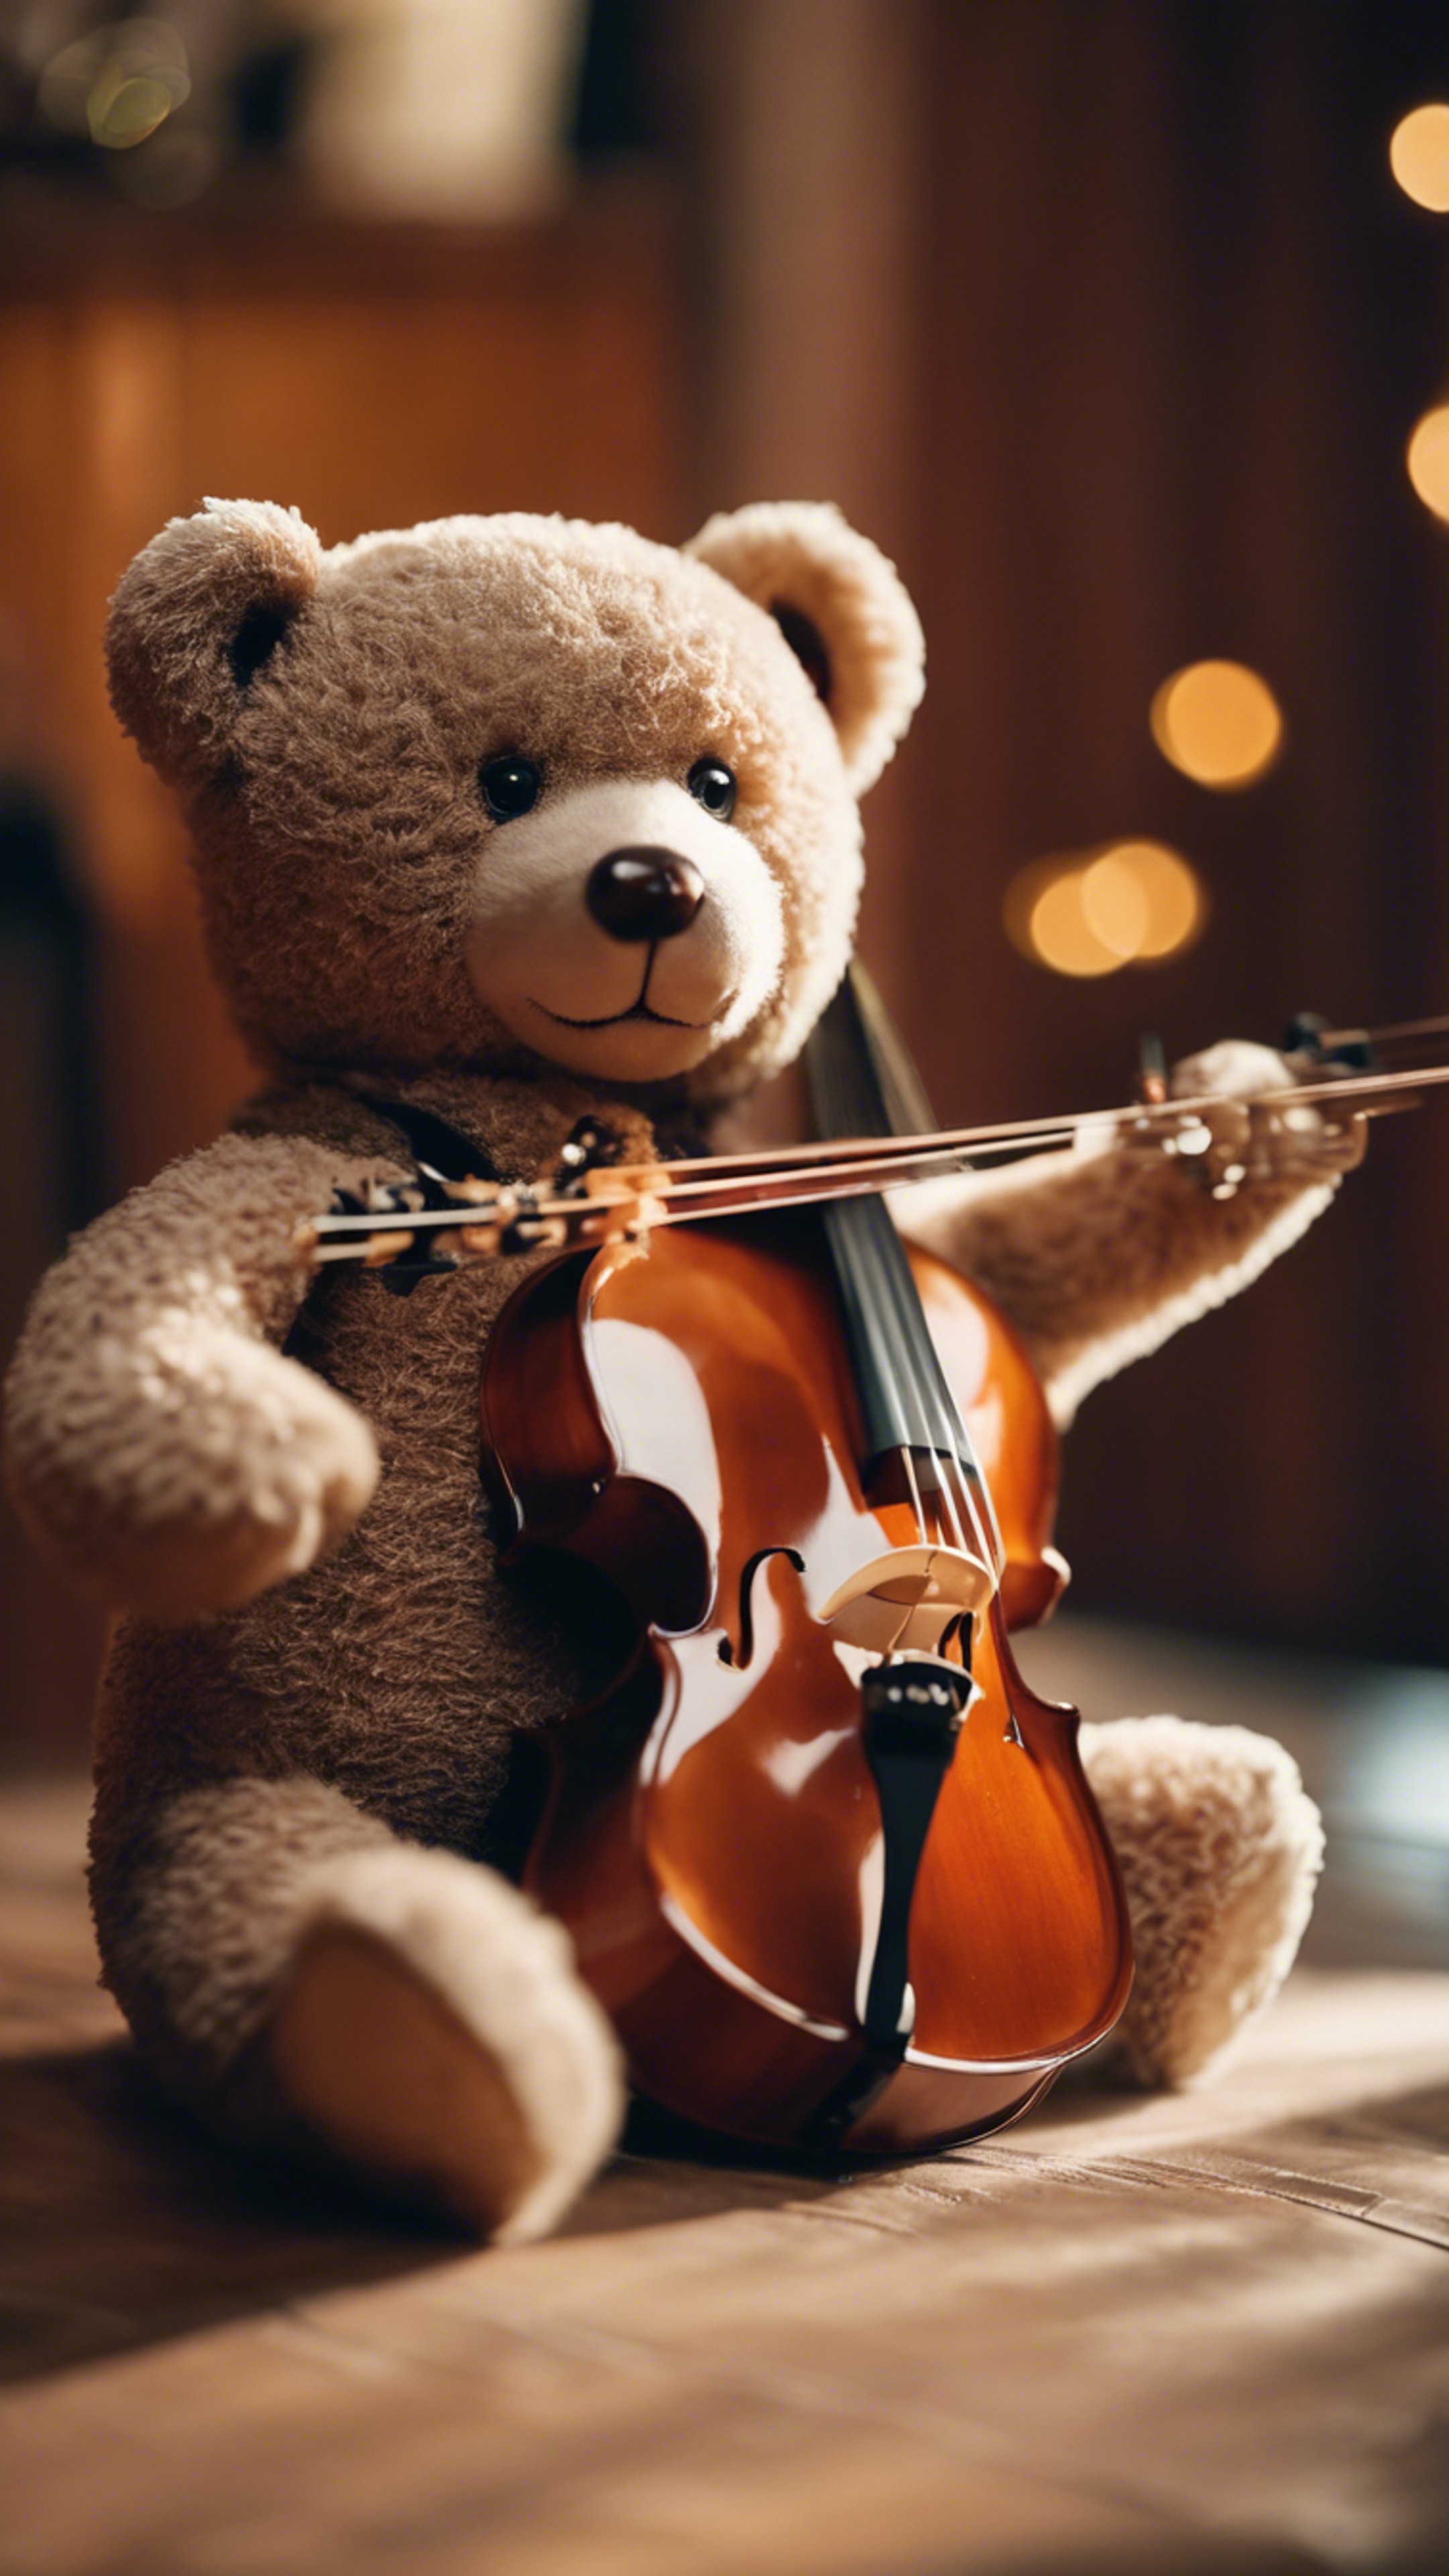 A teddy bear playing a cello in an intimate chamber music setting with toy instruments.壁紙[32aba9d50248440c8322]